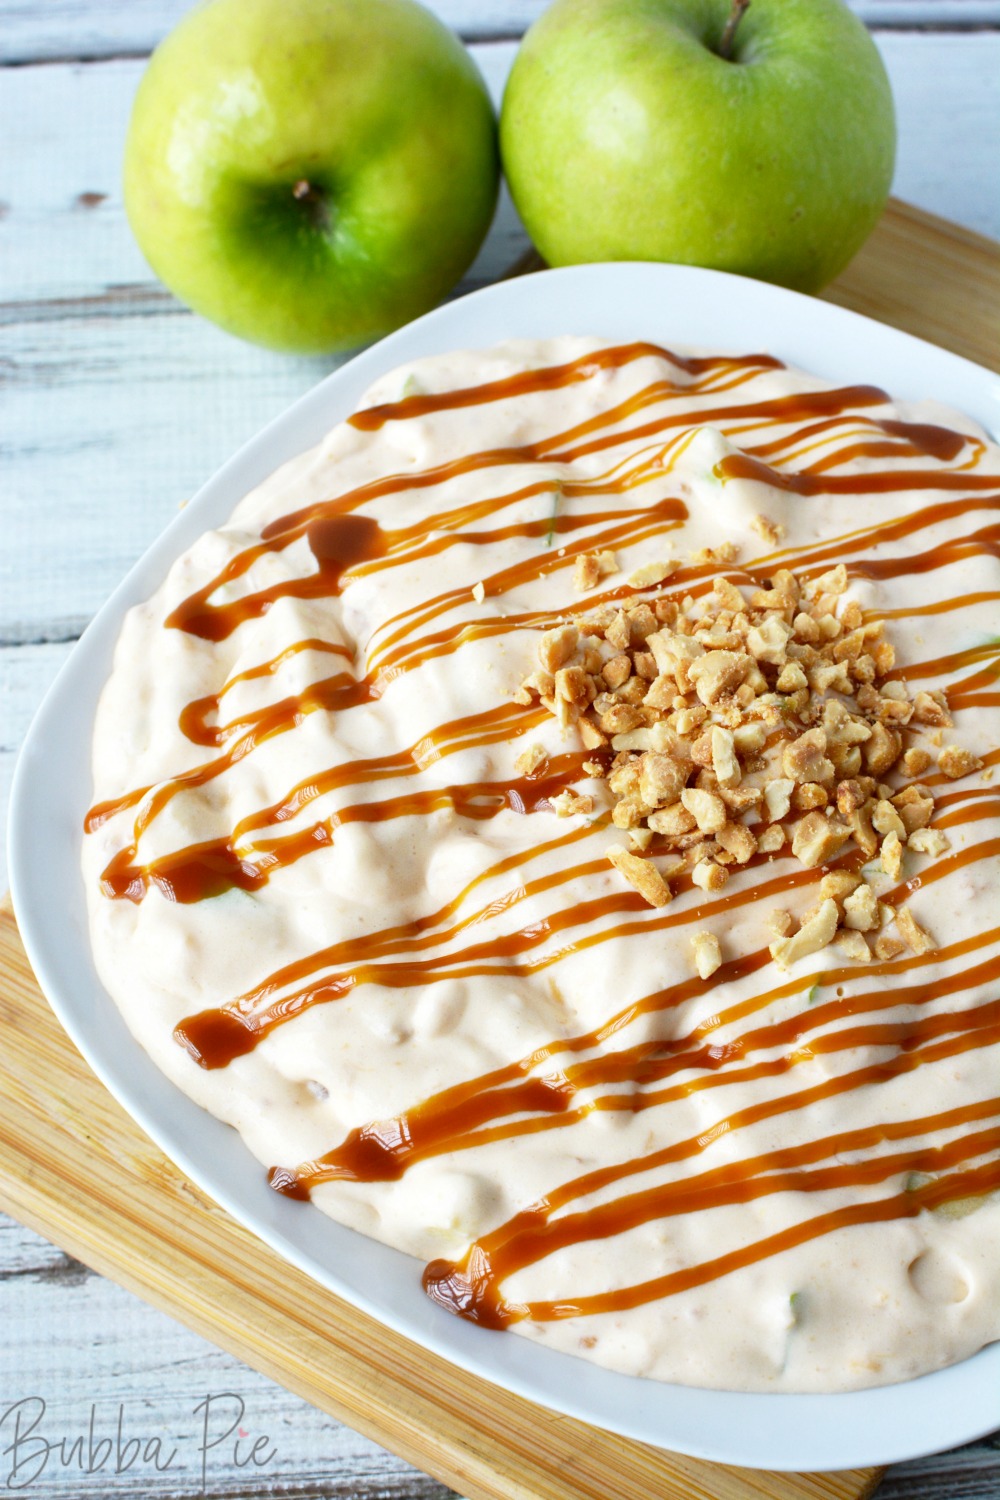 Caramel Apple Salad is topped with nuts and caramel sauce